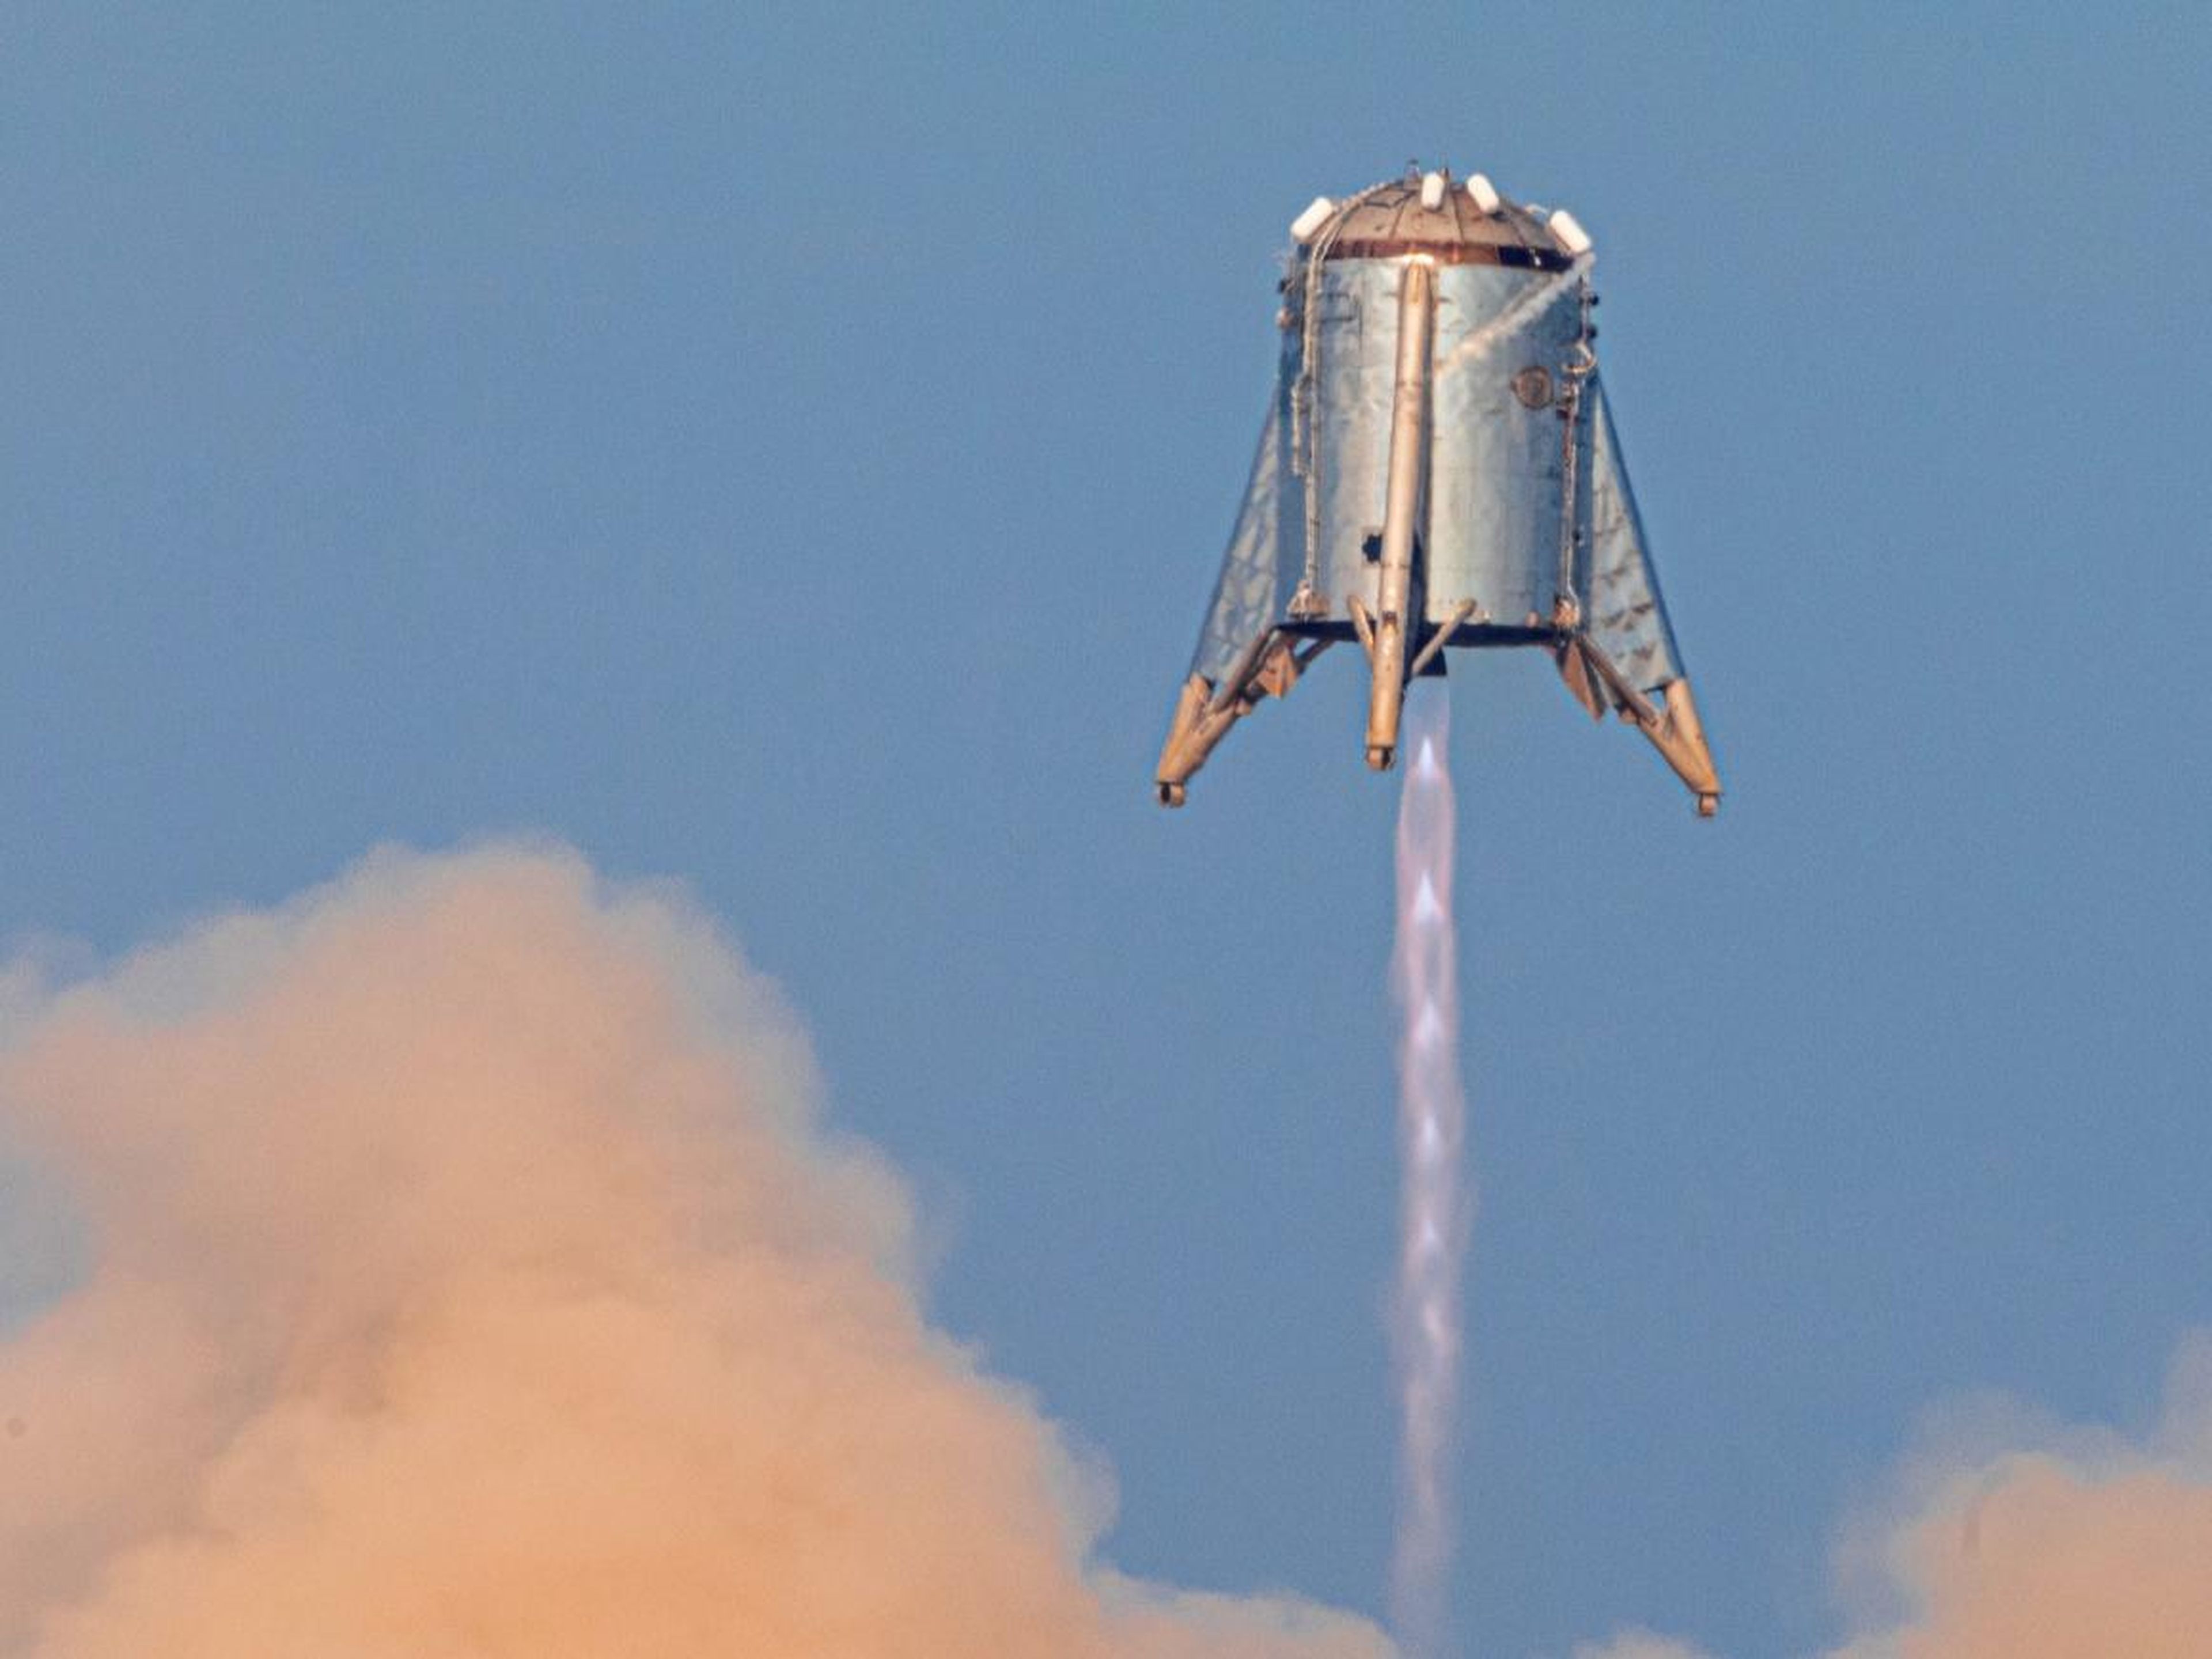 Starhopper — SpaceX's first Mars Starship prototype — hovering over its launchpad during a test flight in Boca Chica, Texas, last Tuesday.